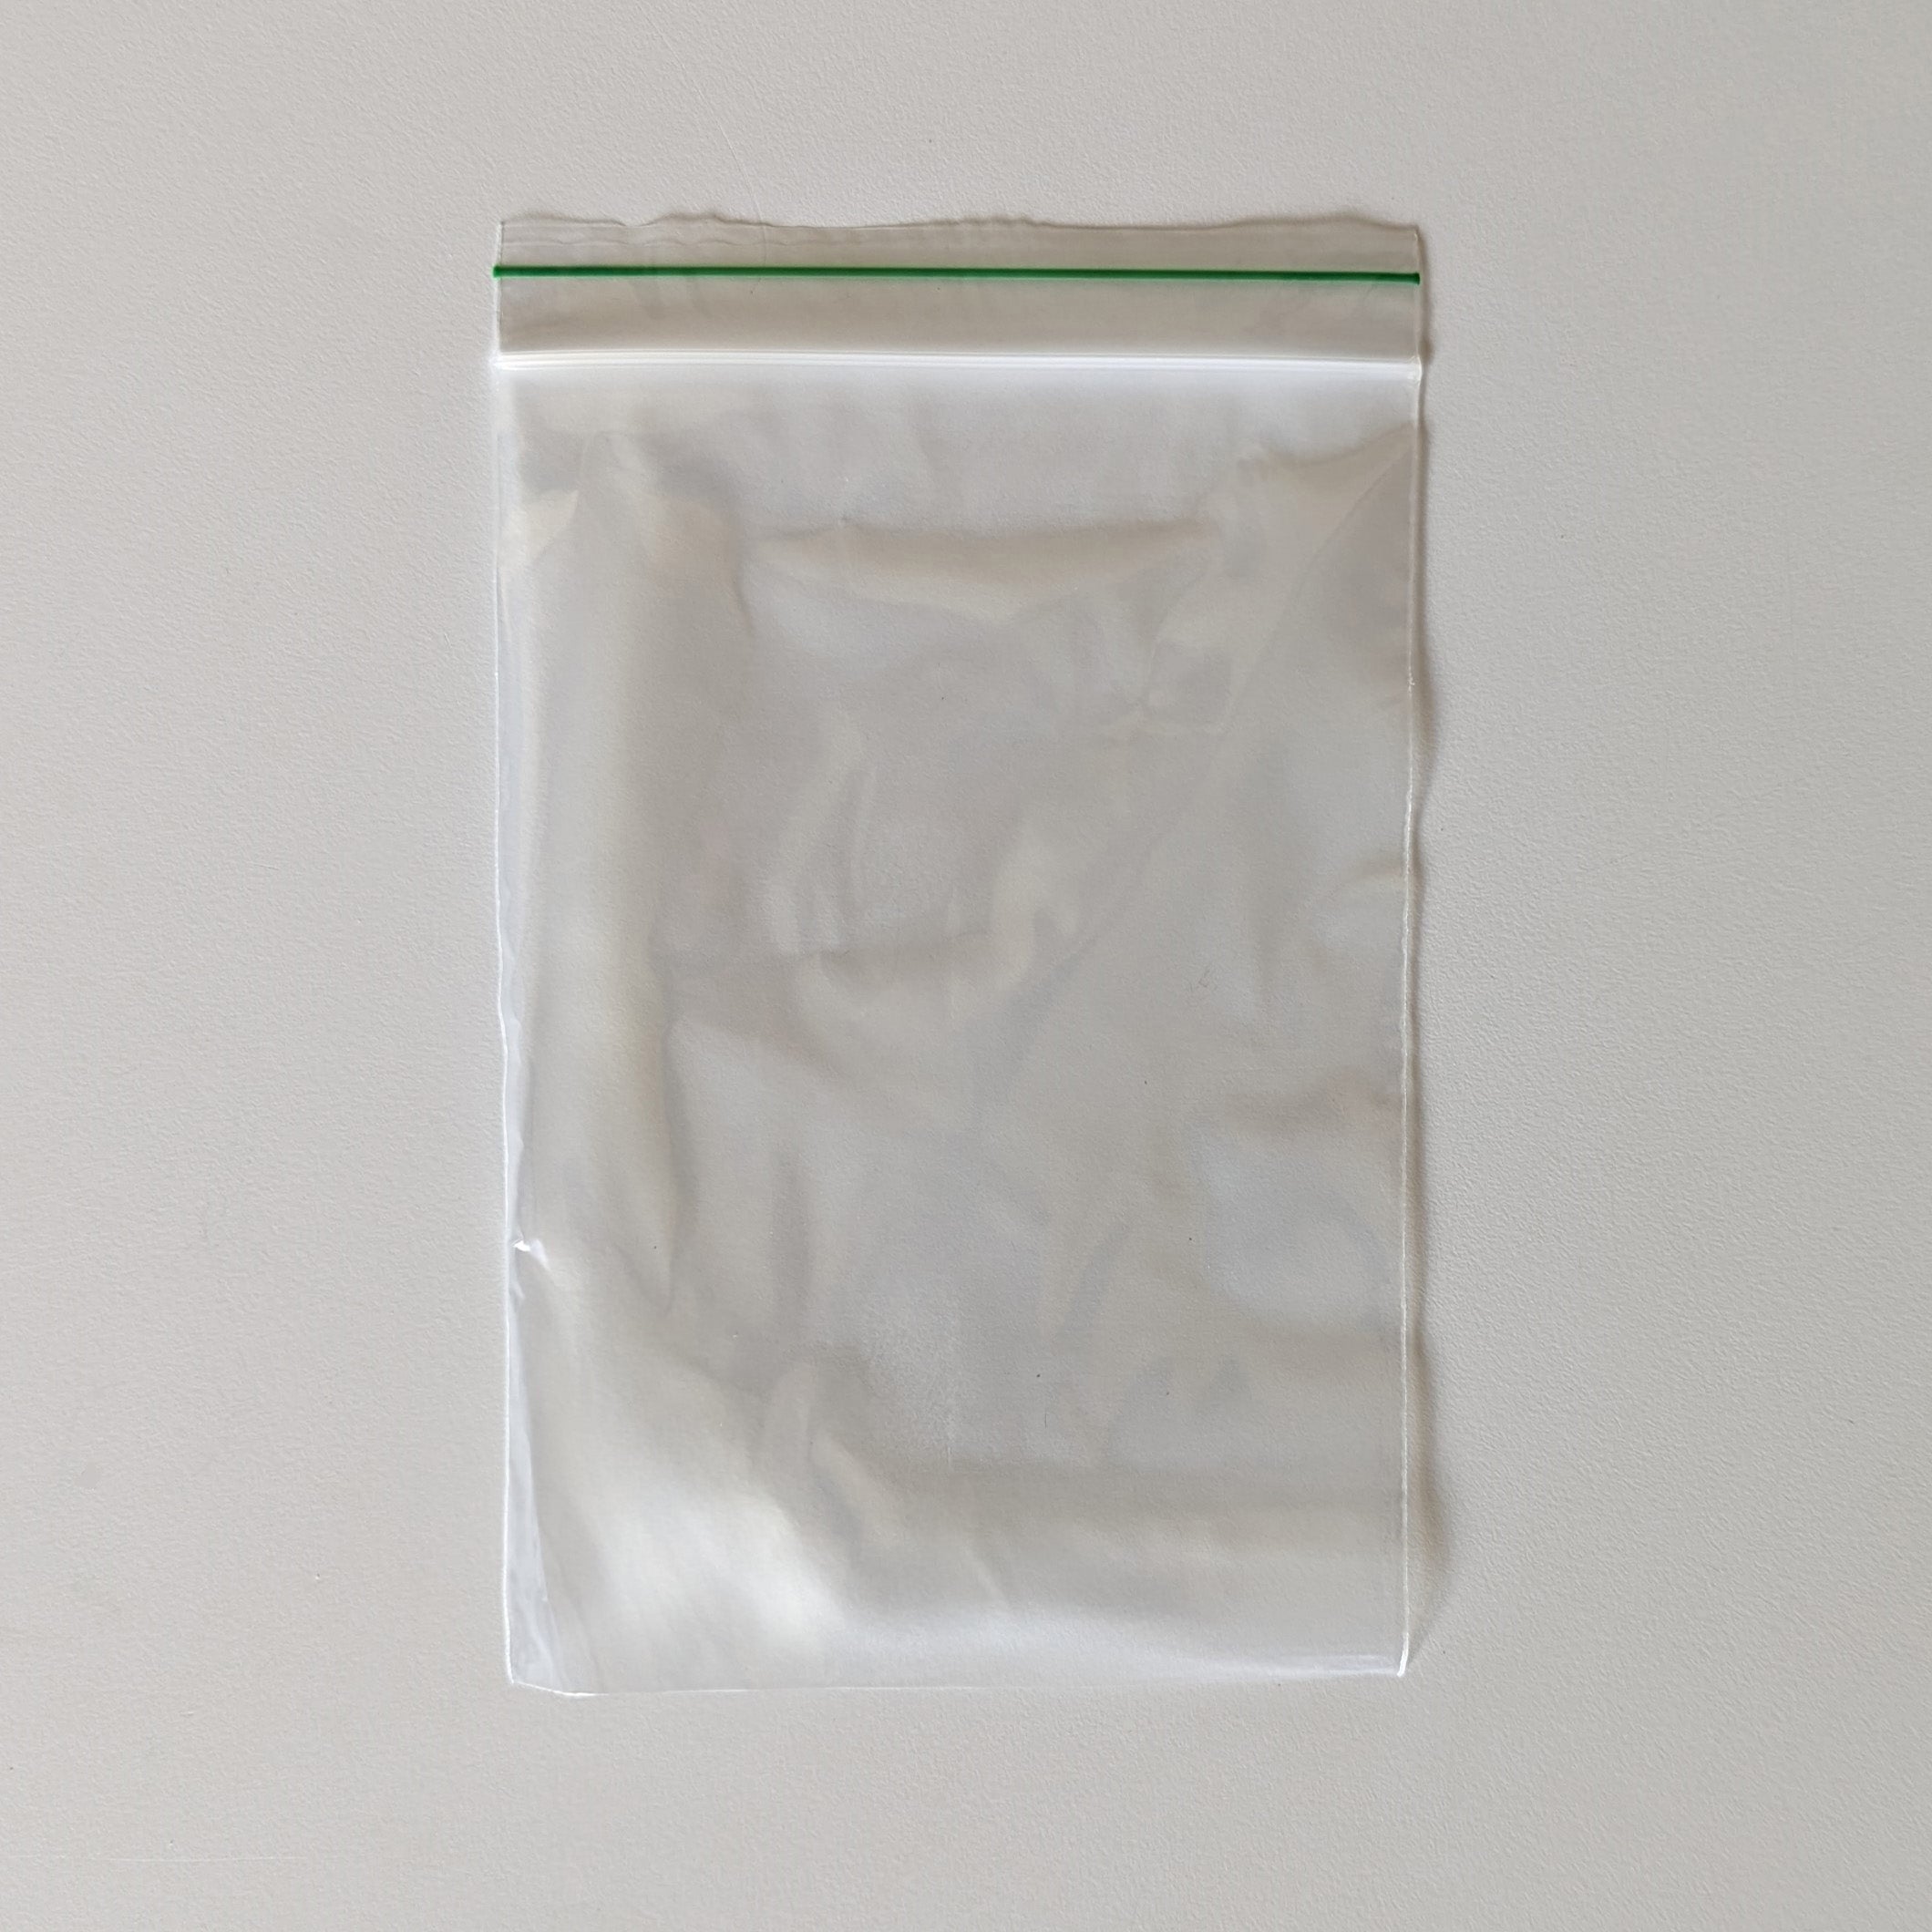 5 Sizes Small Resealable Zipper Bags, Clear Plastic Zipper Bags